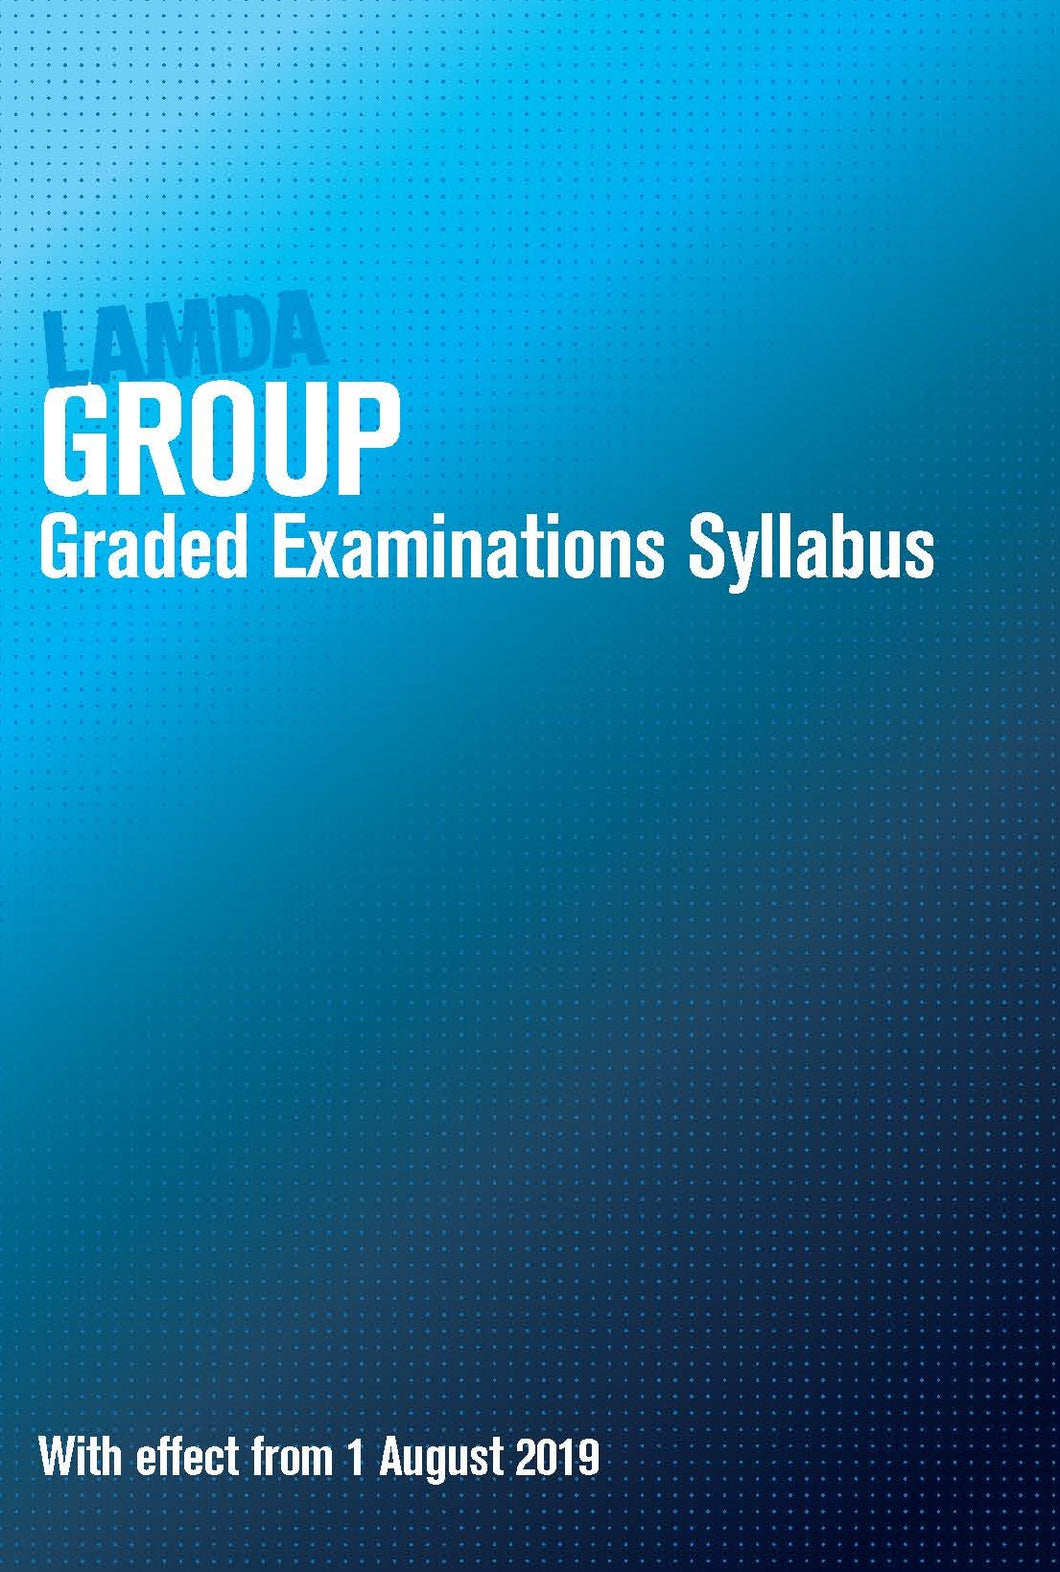 Group syllabus - with effect from 1 August 2019